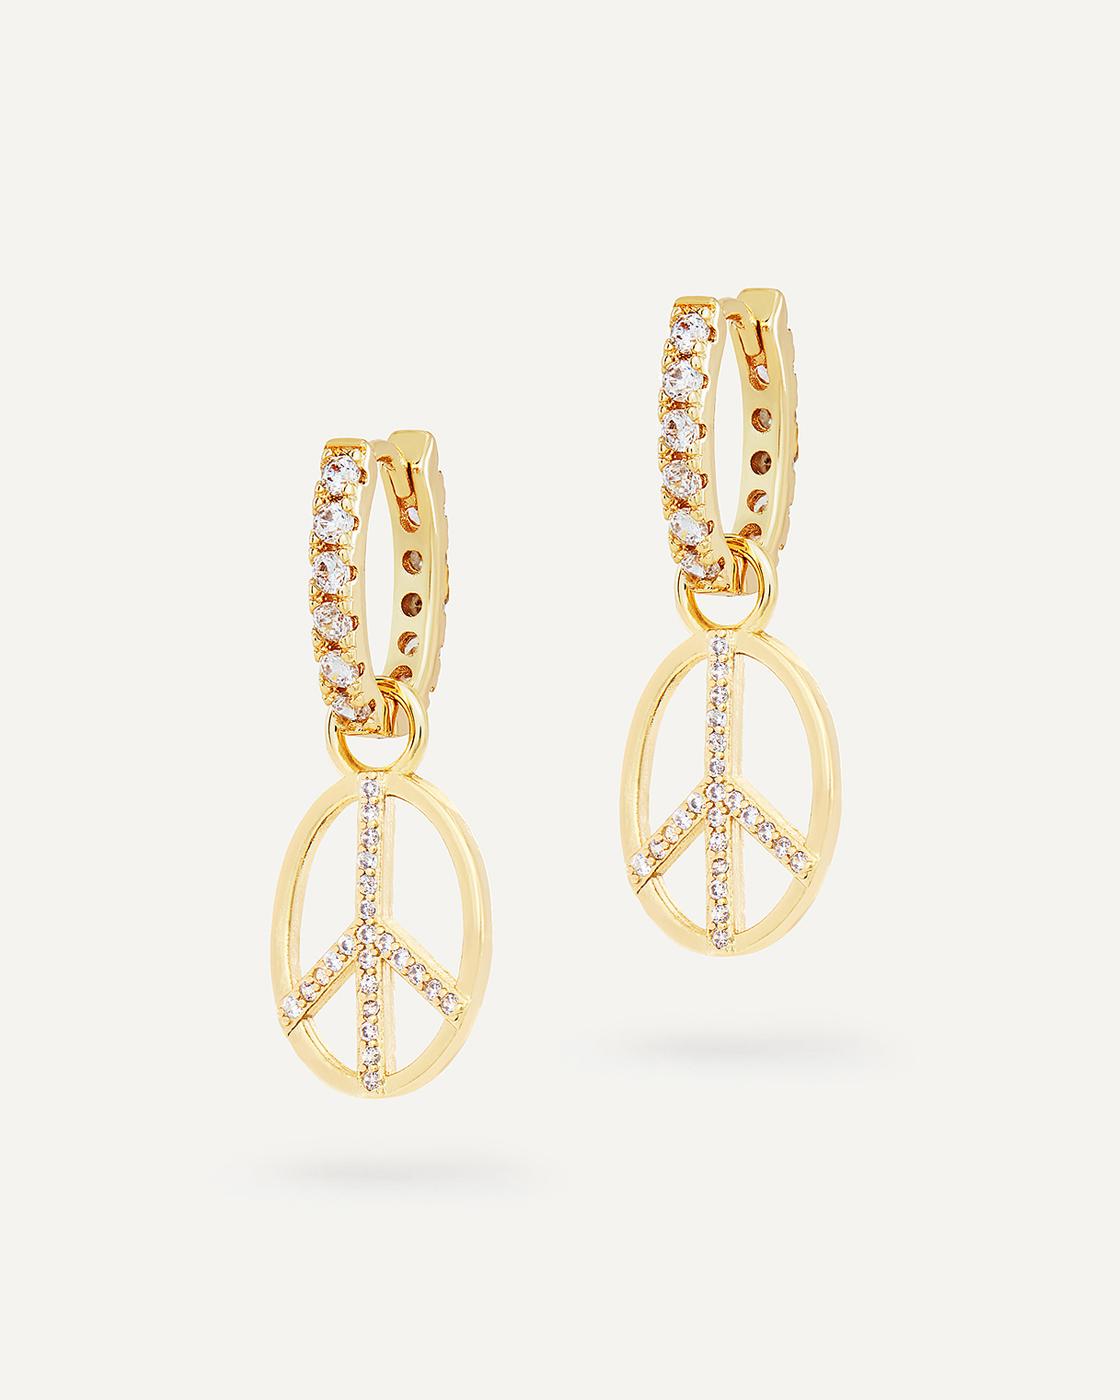 Peace Out Gold-Plated Zirkonia Earrings with Peace Charm